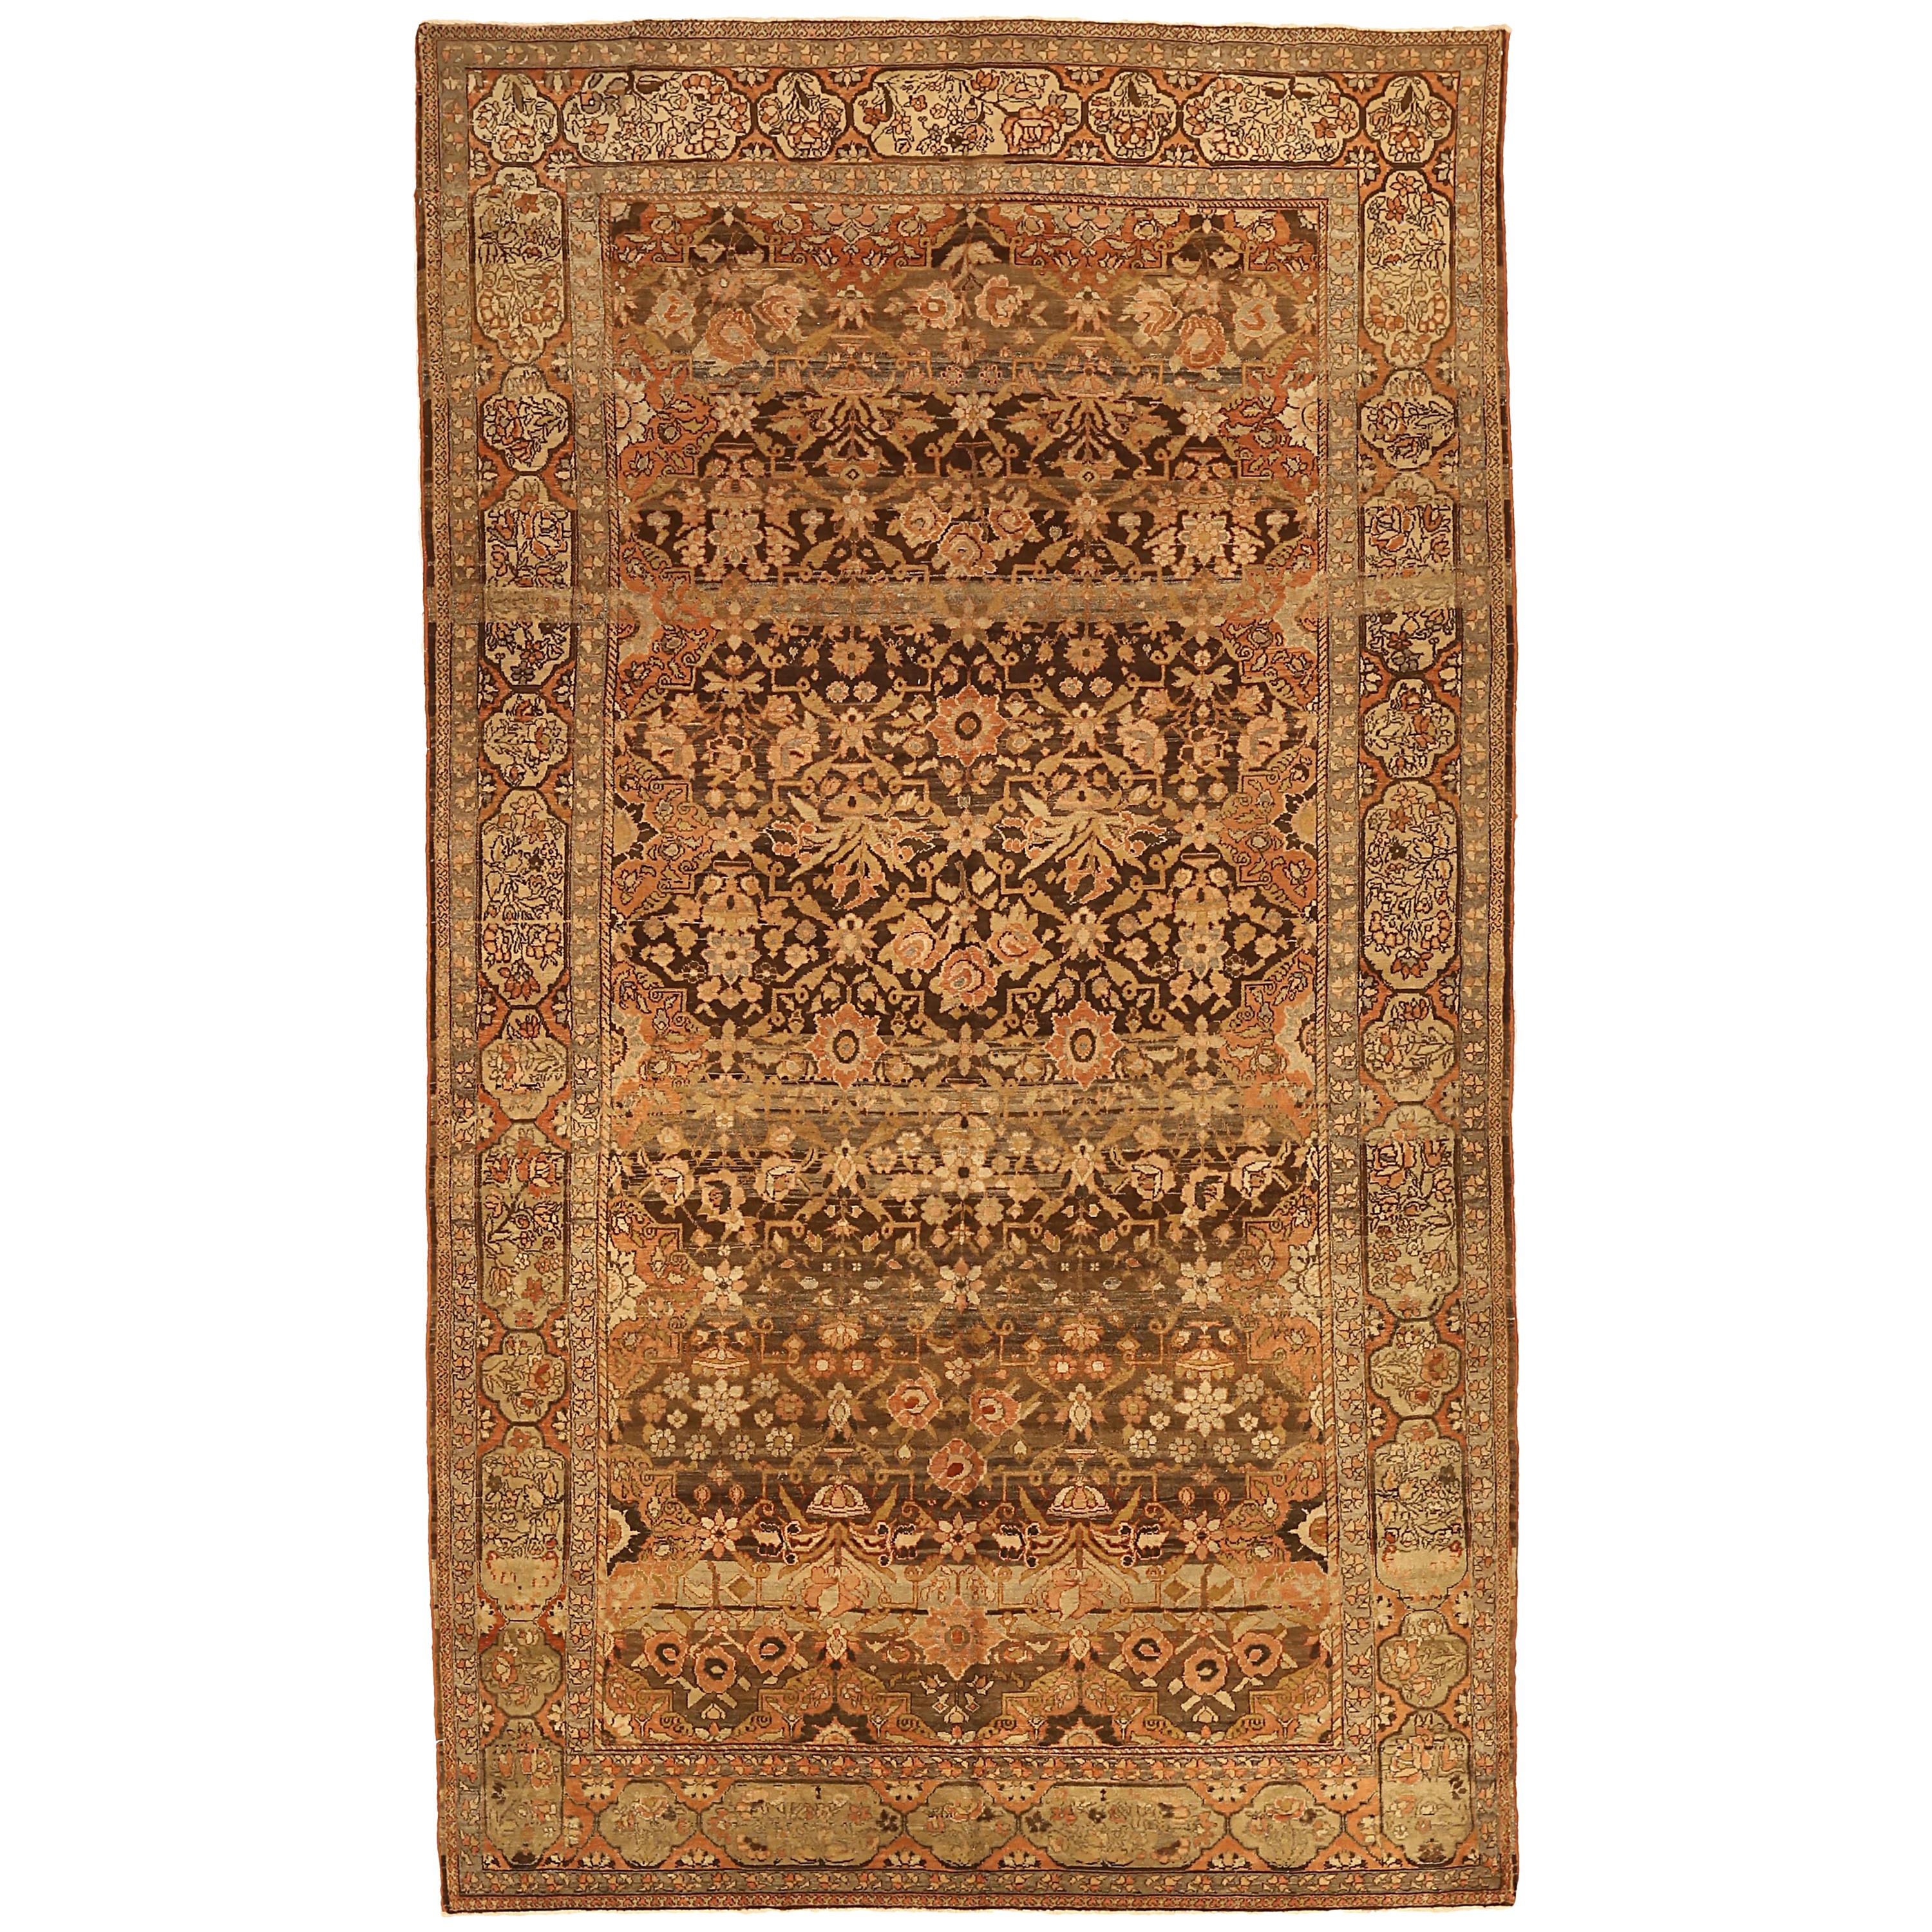 Antique Persian Bakhtiar Rug with Floral Details on Brown Field